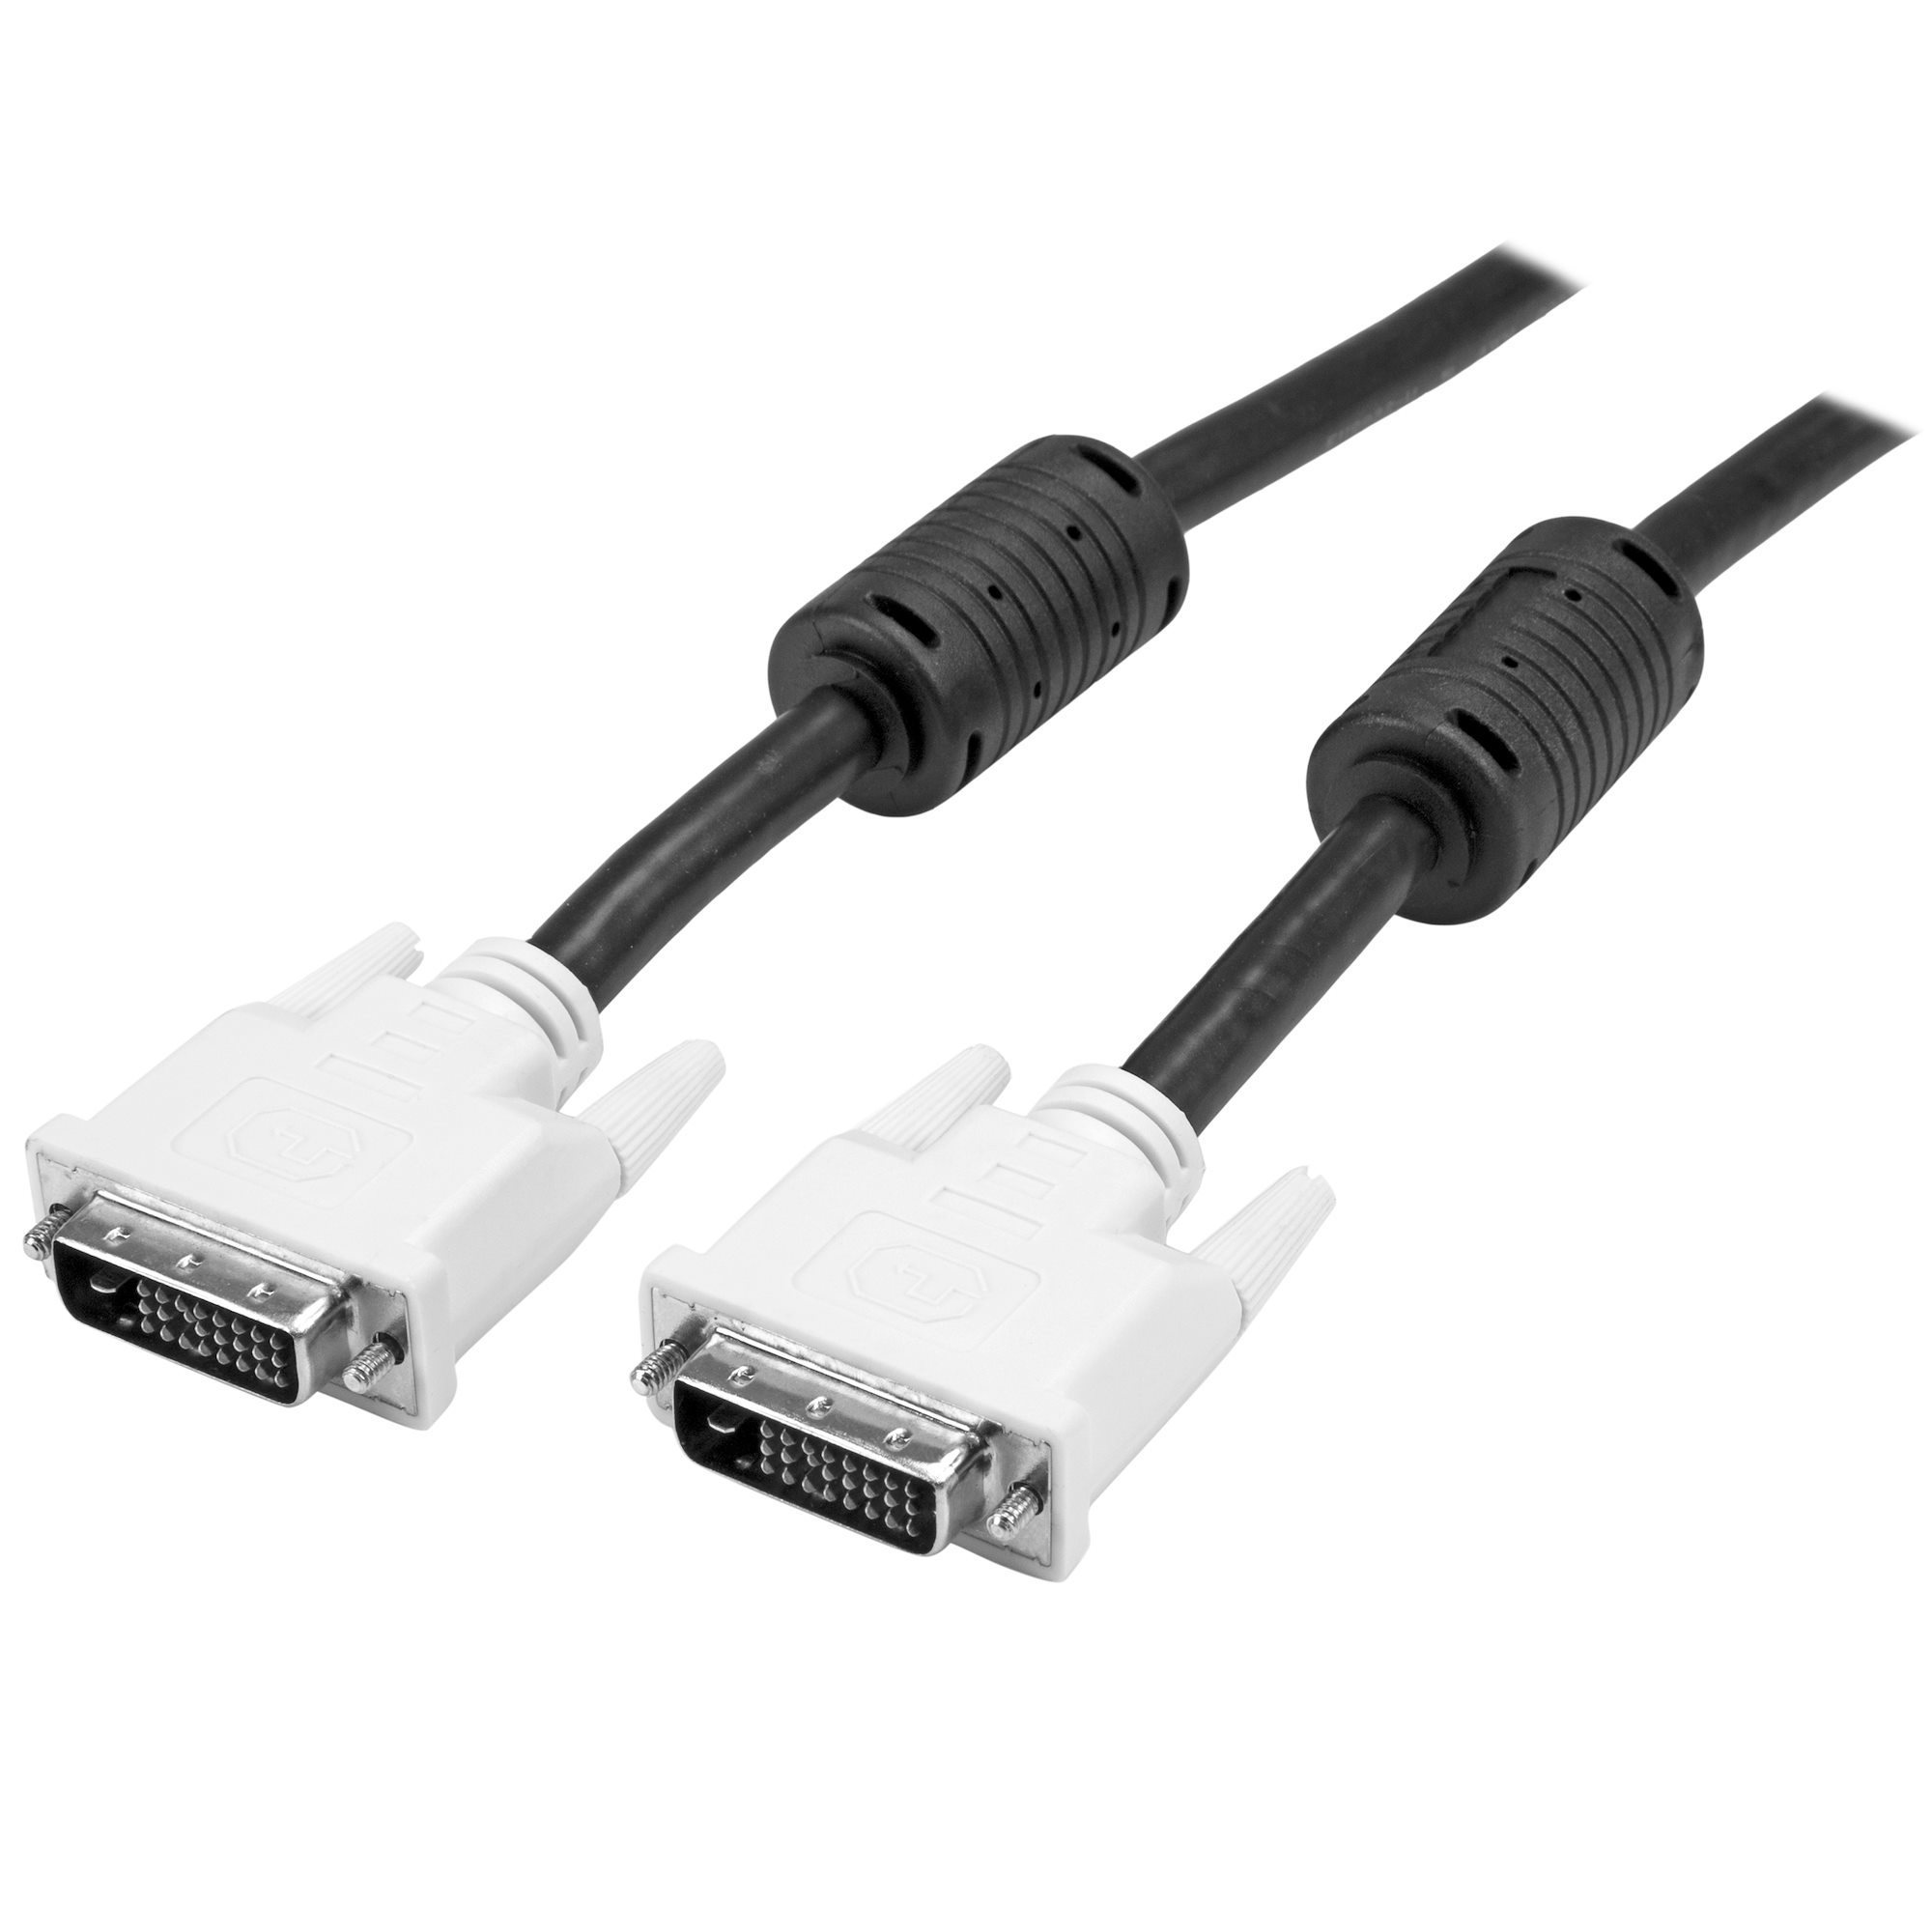 Digital Video M to M Extension Cable For HDTV&Video 15Ft DVI-D Dual Link 24+1 